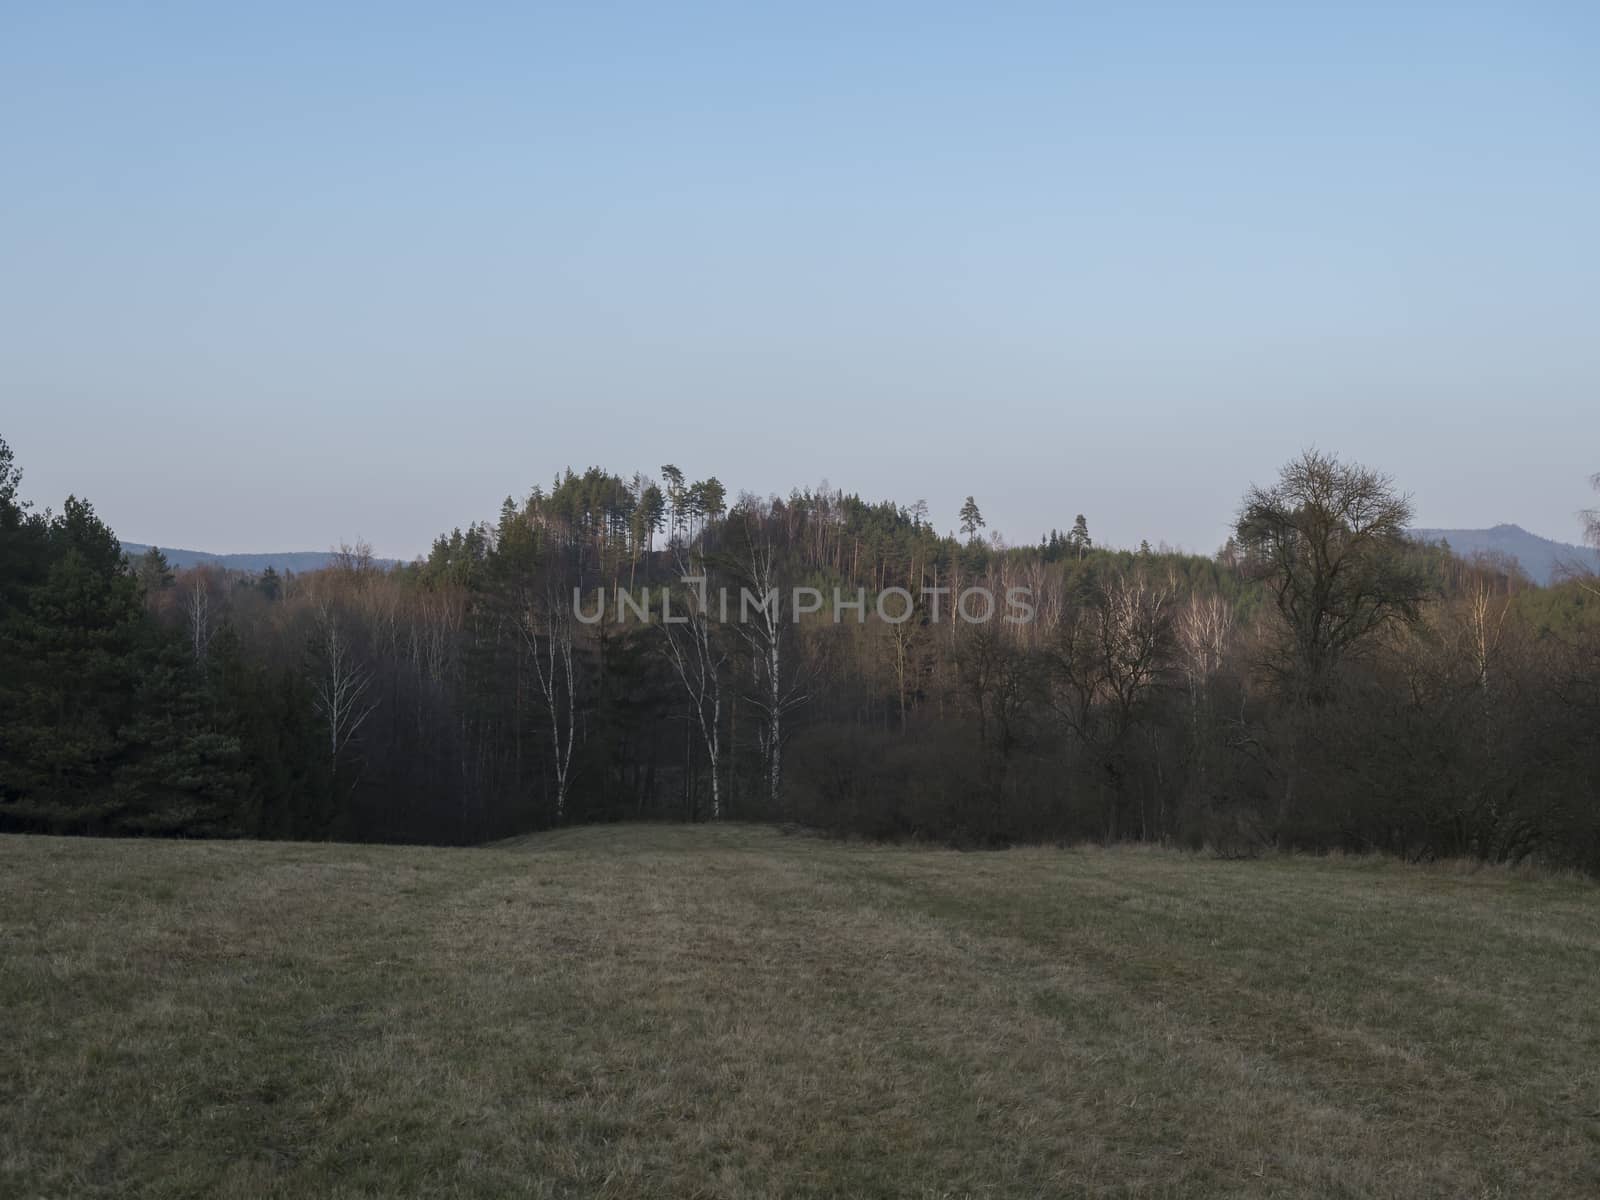 early spring landscape at Lusatian mountains, with grass meadow, bare trees, deciduous and spruce tree forest, hills, clear blue sky background, golden hour light, horizontal, copy space.